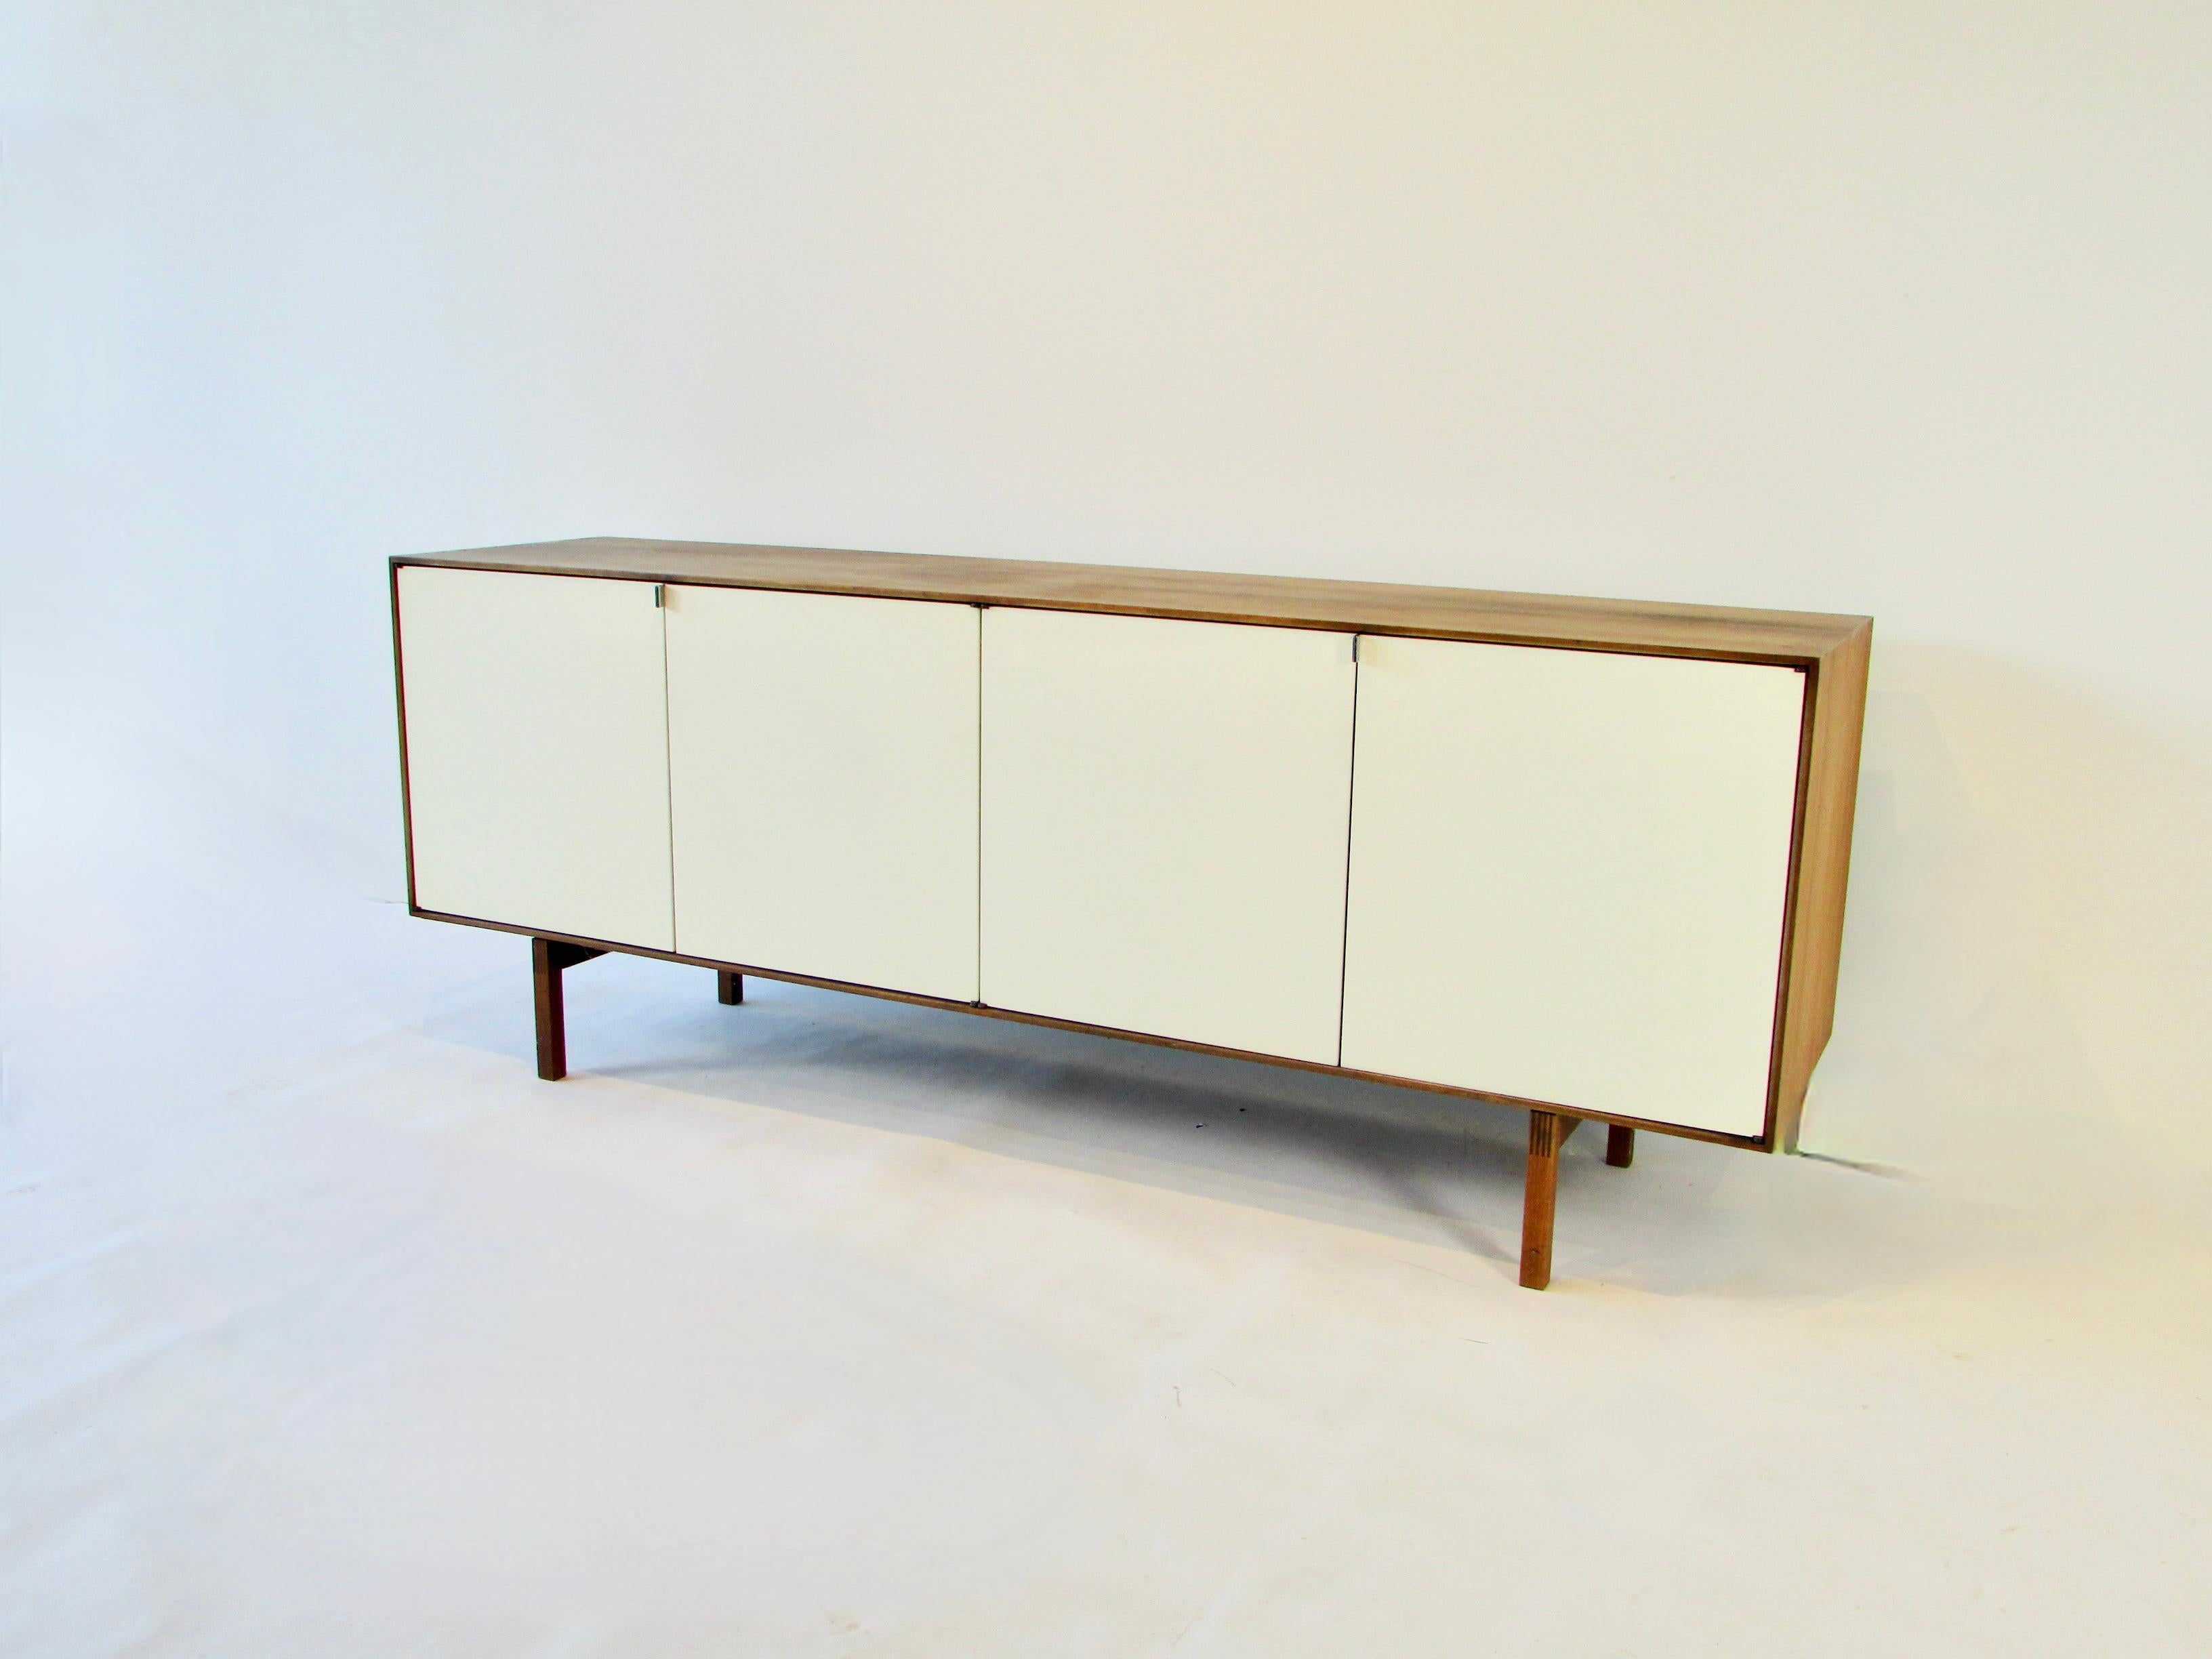 Florence Knoll design for Knoll. Walnut cabinet with four across lacquered doors on square dove tailed legs. Fitted interior of blonde maple includes four adjustable shelves and two drawers. Retains label on underside.